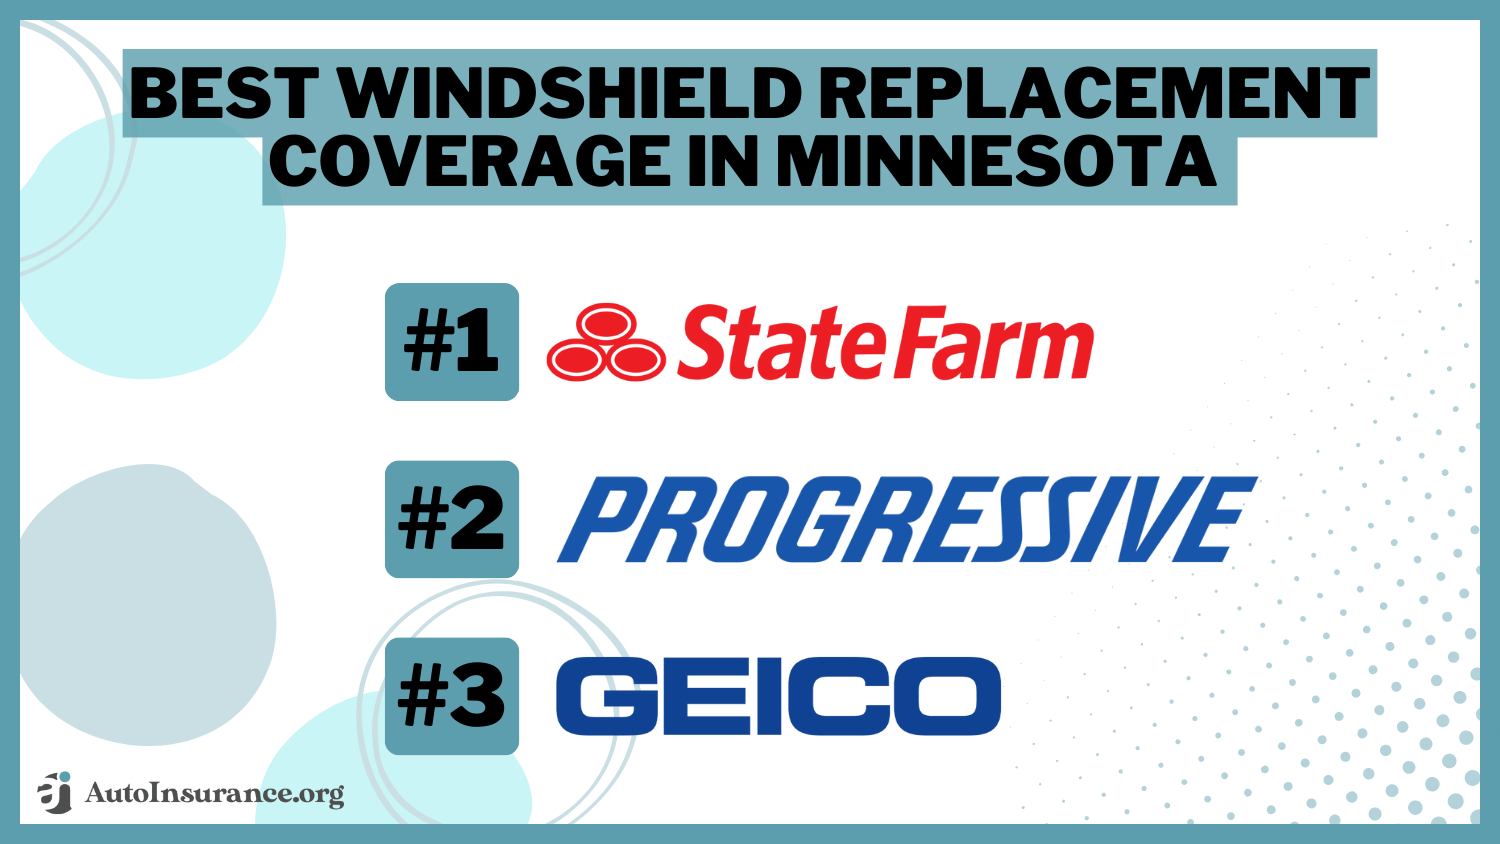 Best Windshield Replacement Coverage in Minnesota: State Farm, Progressive, and Geico